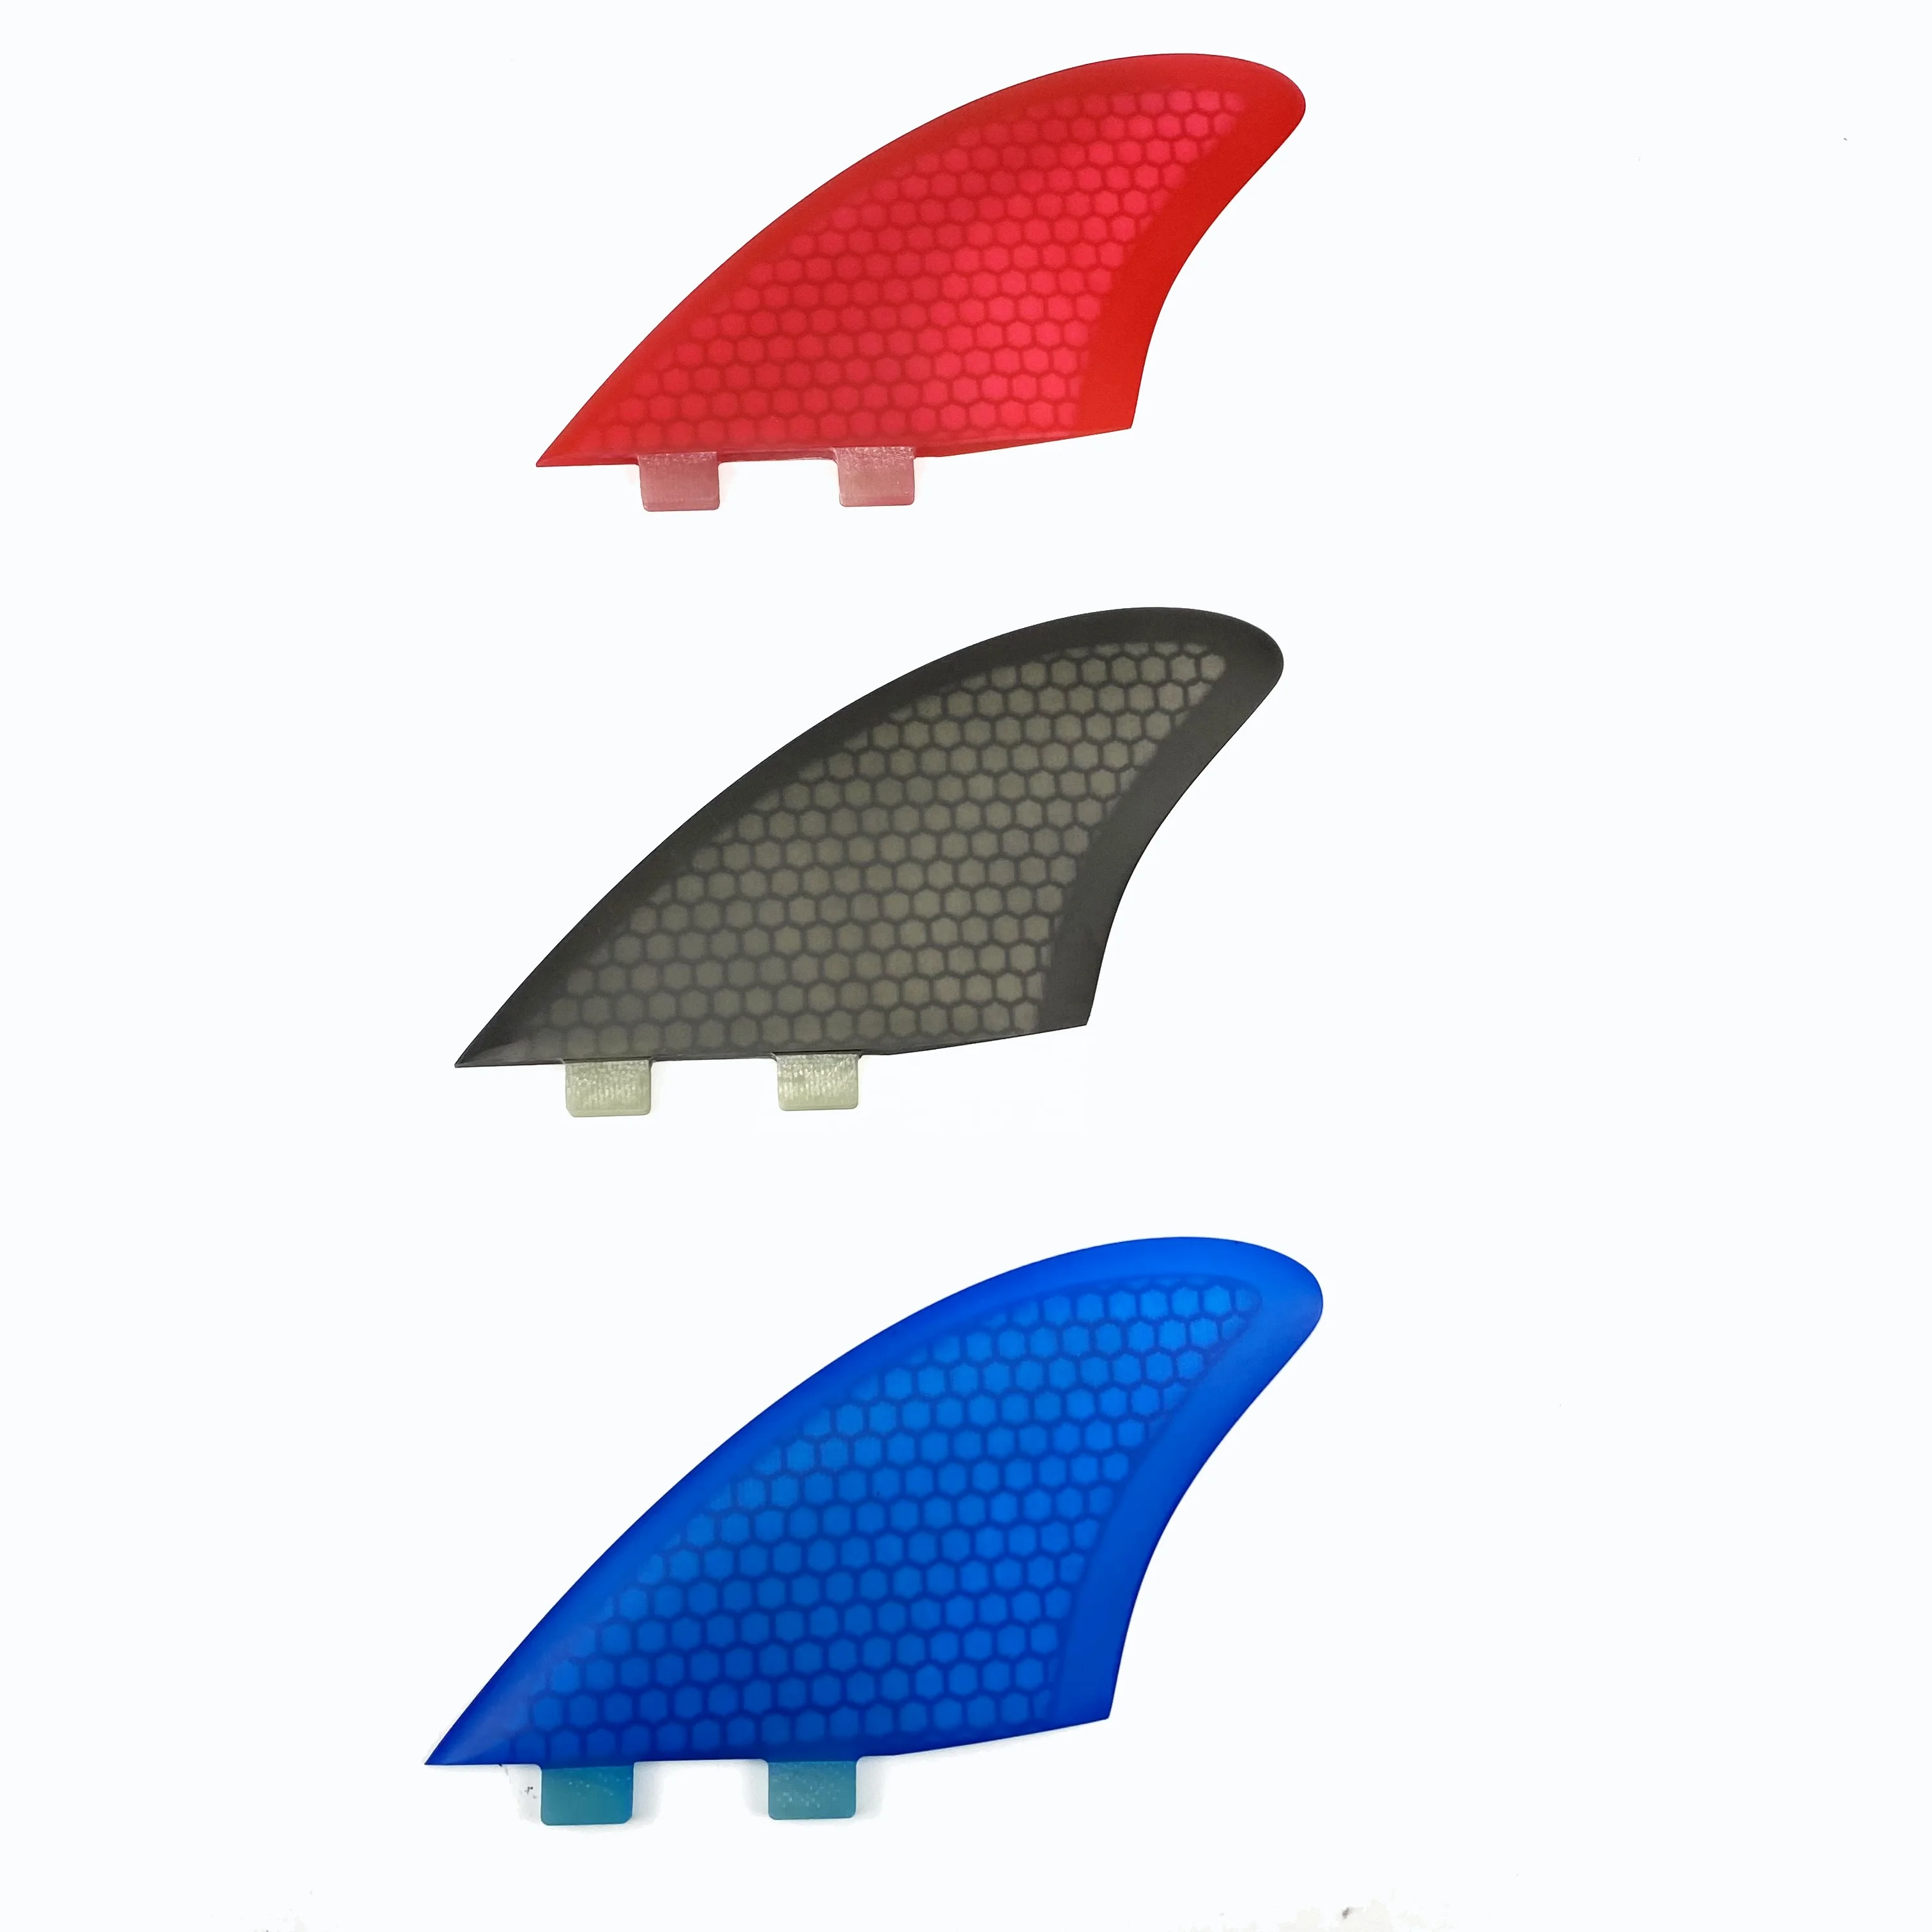 

Light Weight Surfboard Twin Keel Fins (2 Fins) - Twin Tab or Single Tab Sizes,Float Surf Fins for Fish Surf Boards, Optional